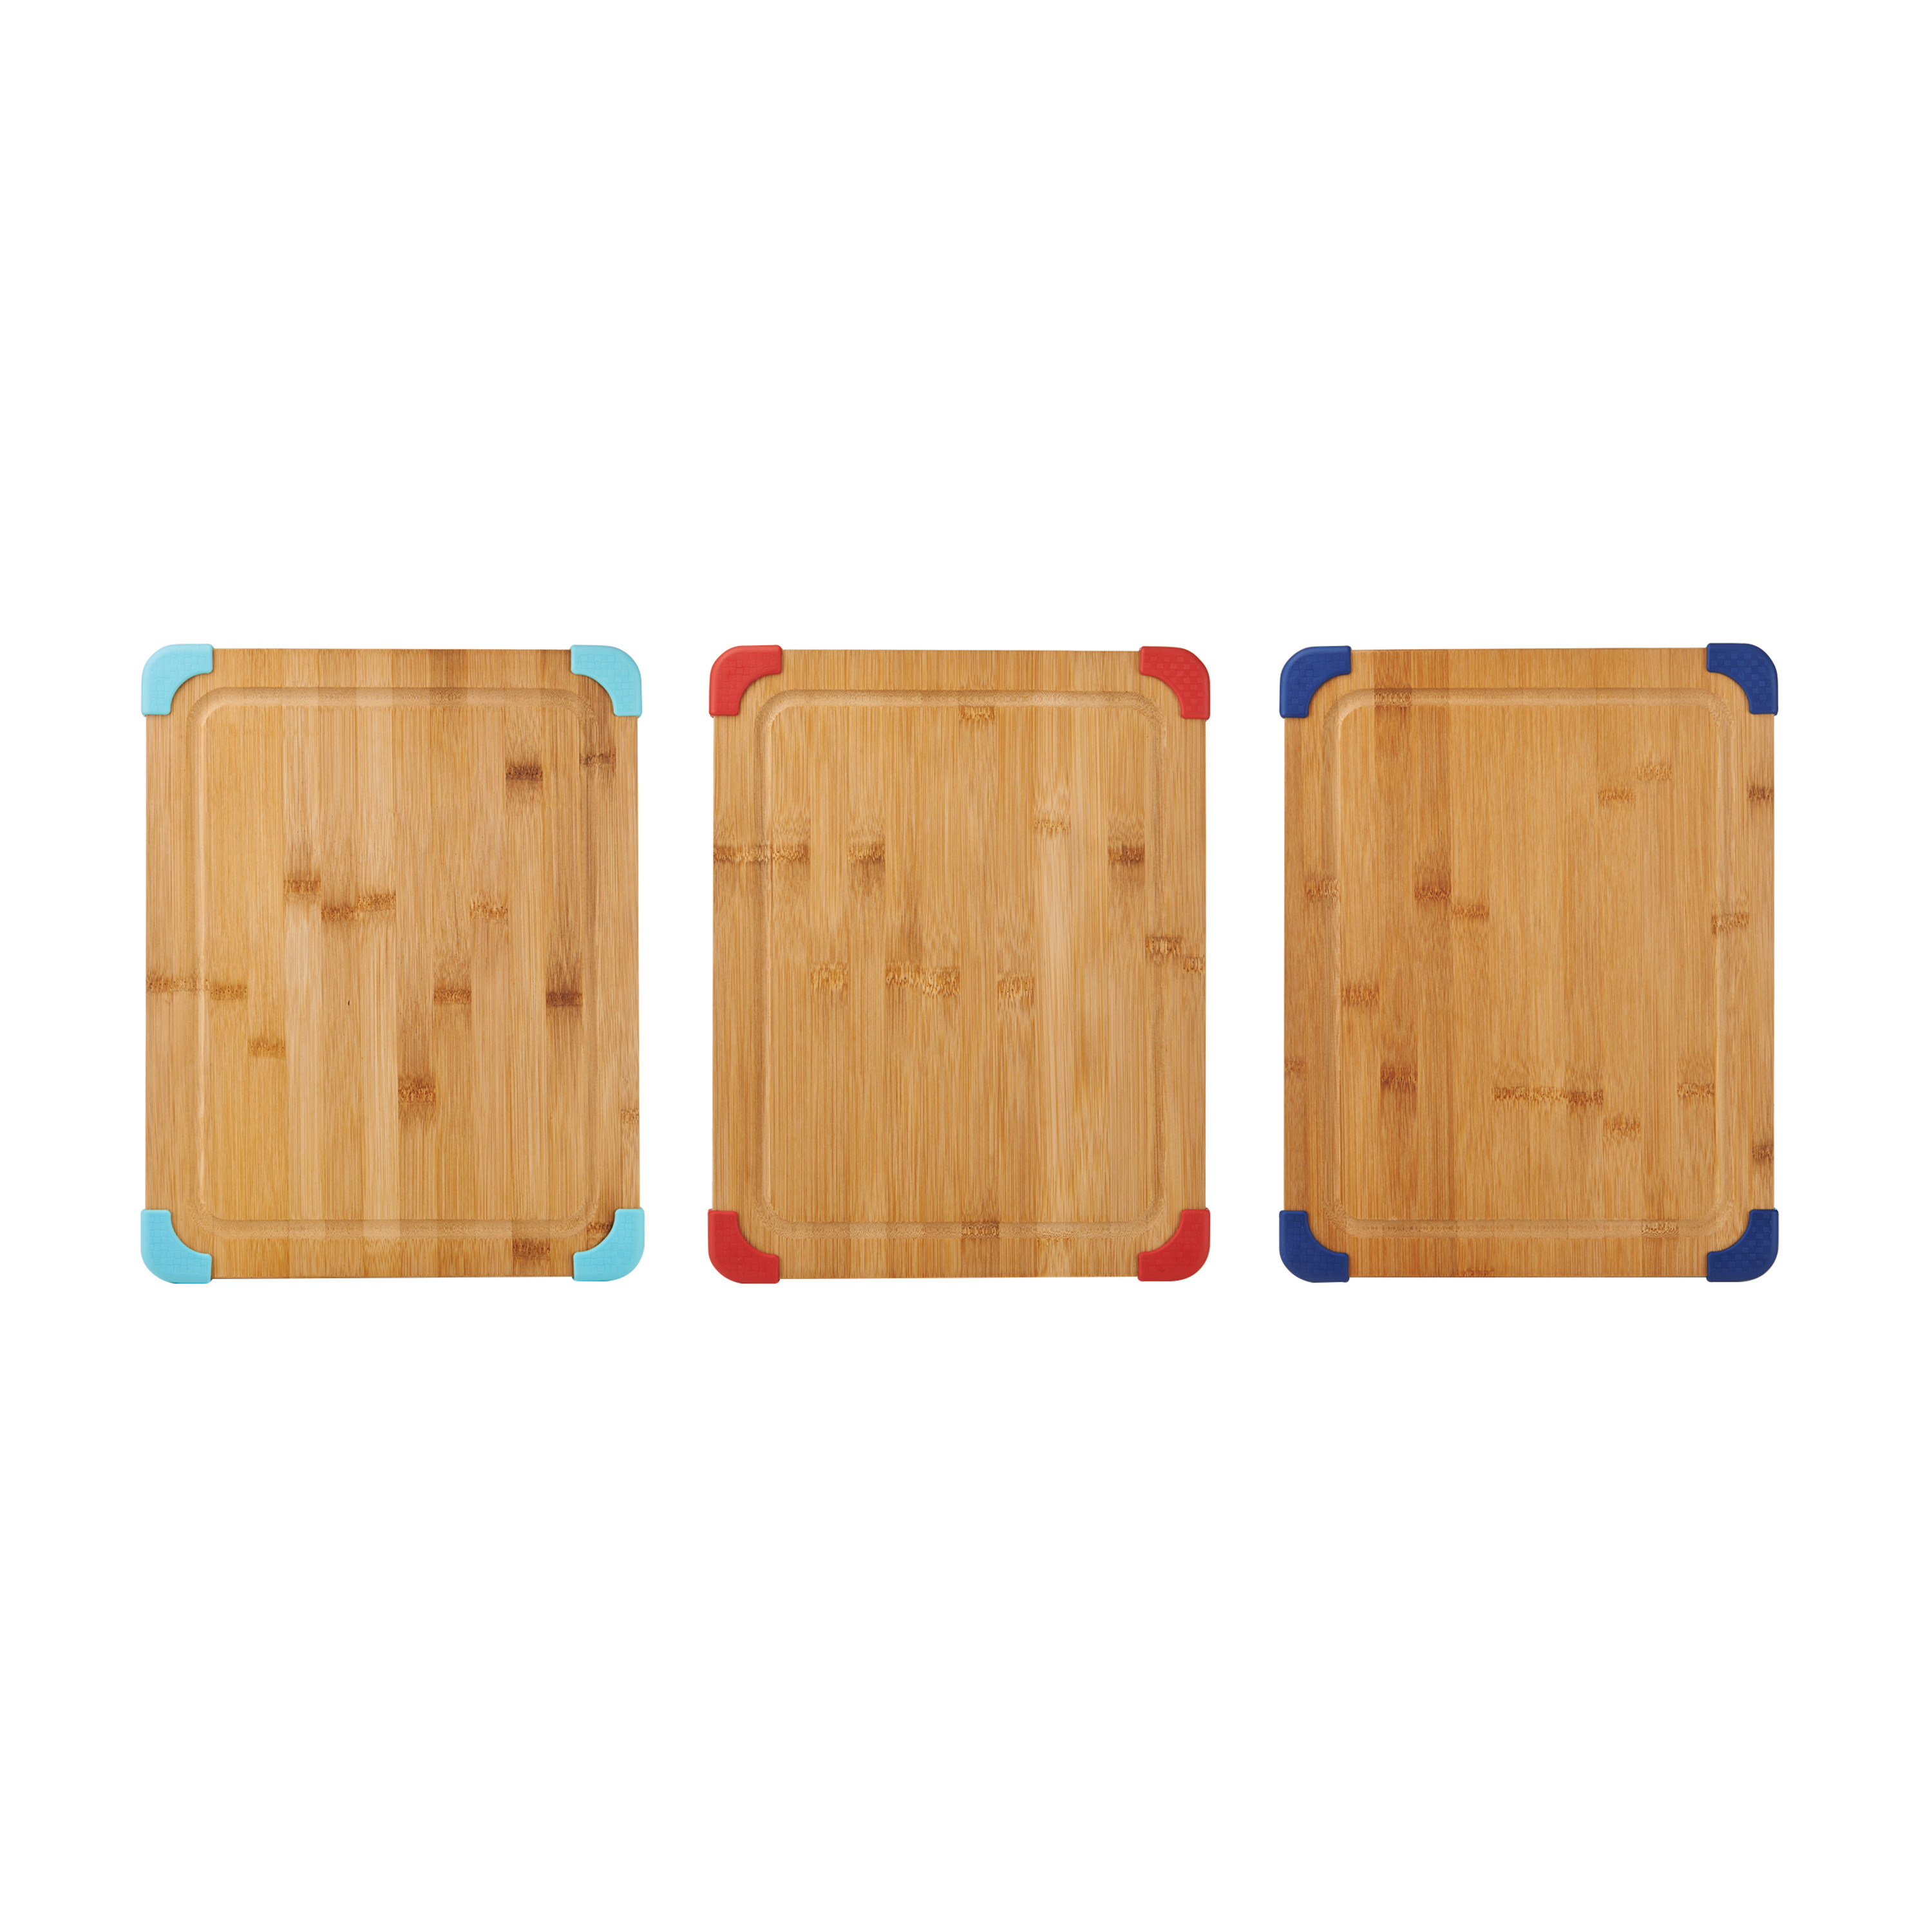 Farberware 11-inch x 14-inch Thick Bamboo Cutting Board with Nonslip Corners, Store Only Item, Assorted Colors, 1 Only - image 3 of 10